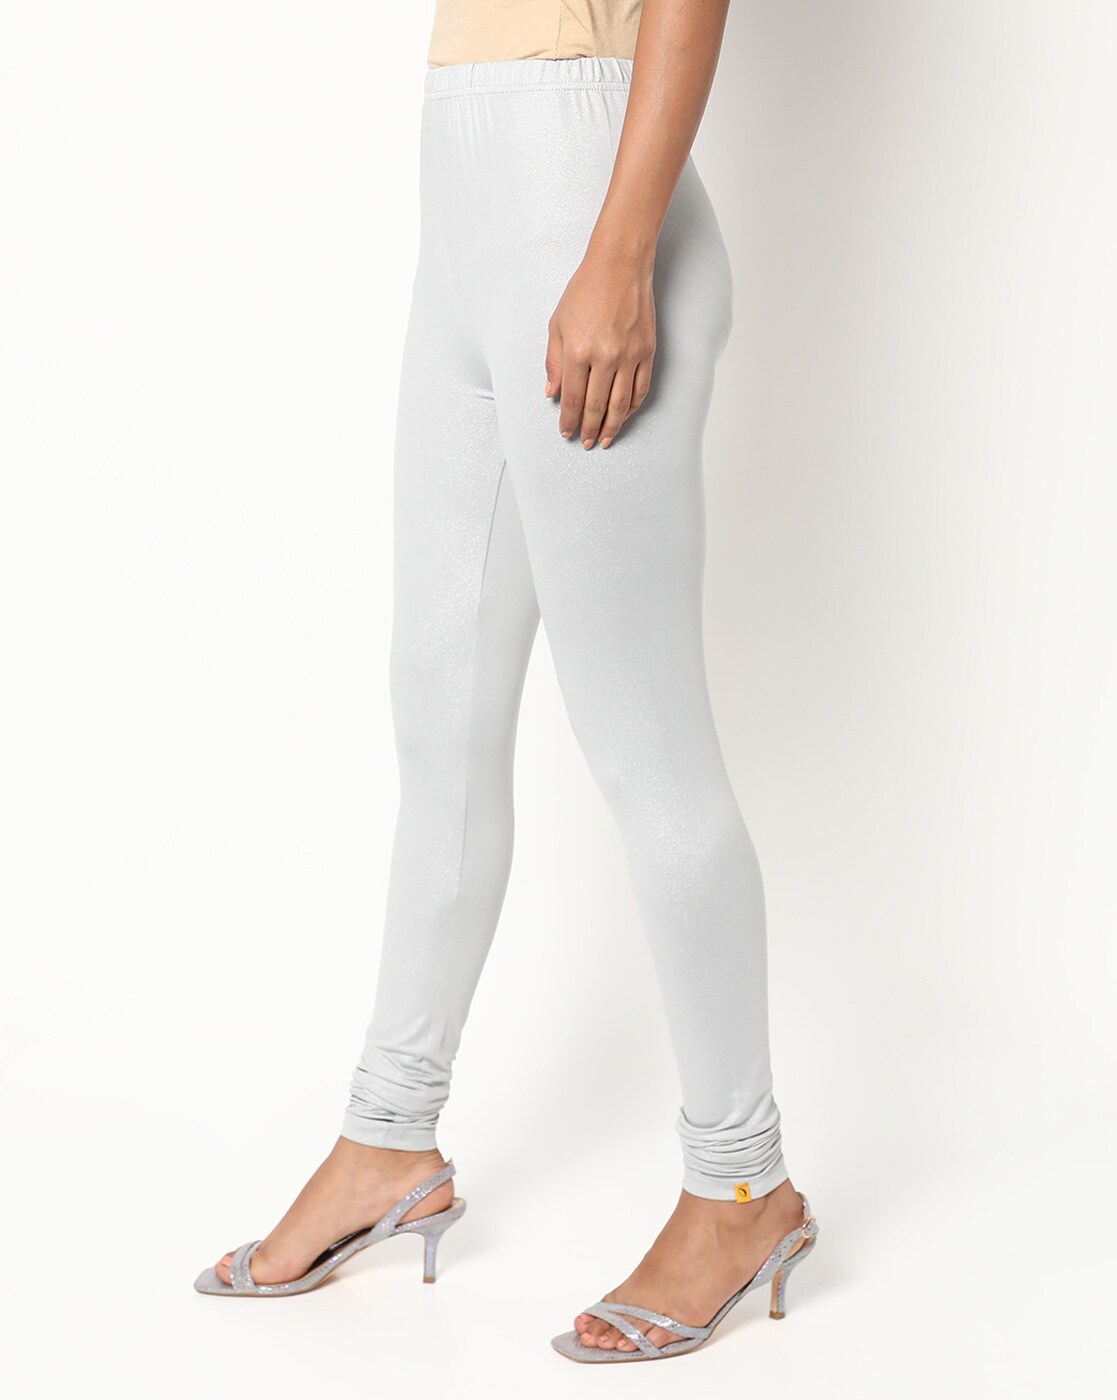 AURELIA Women Peach-Coloured Solid Ankle Length Leggings Price in India,  Full Specifications & Offers | DTashion.com